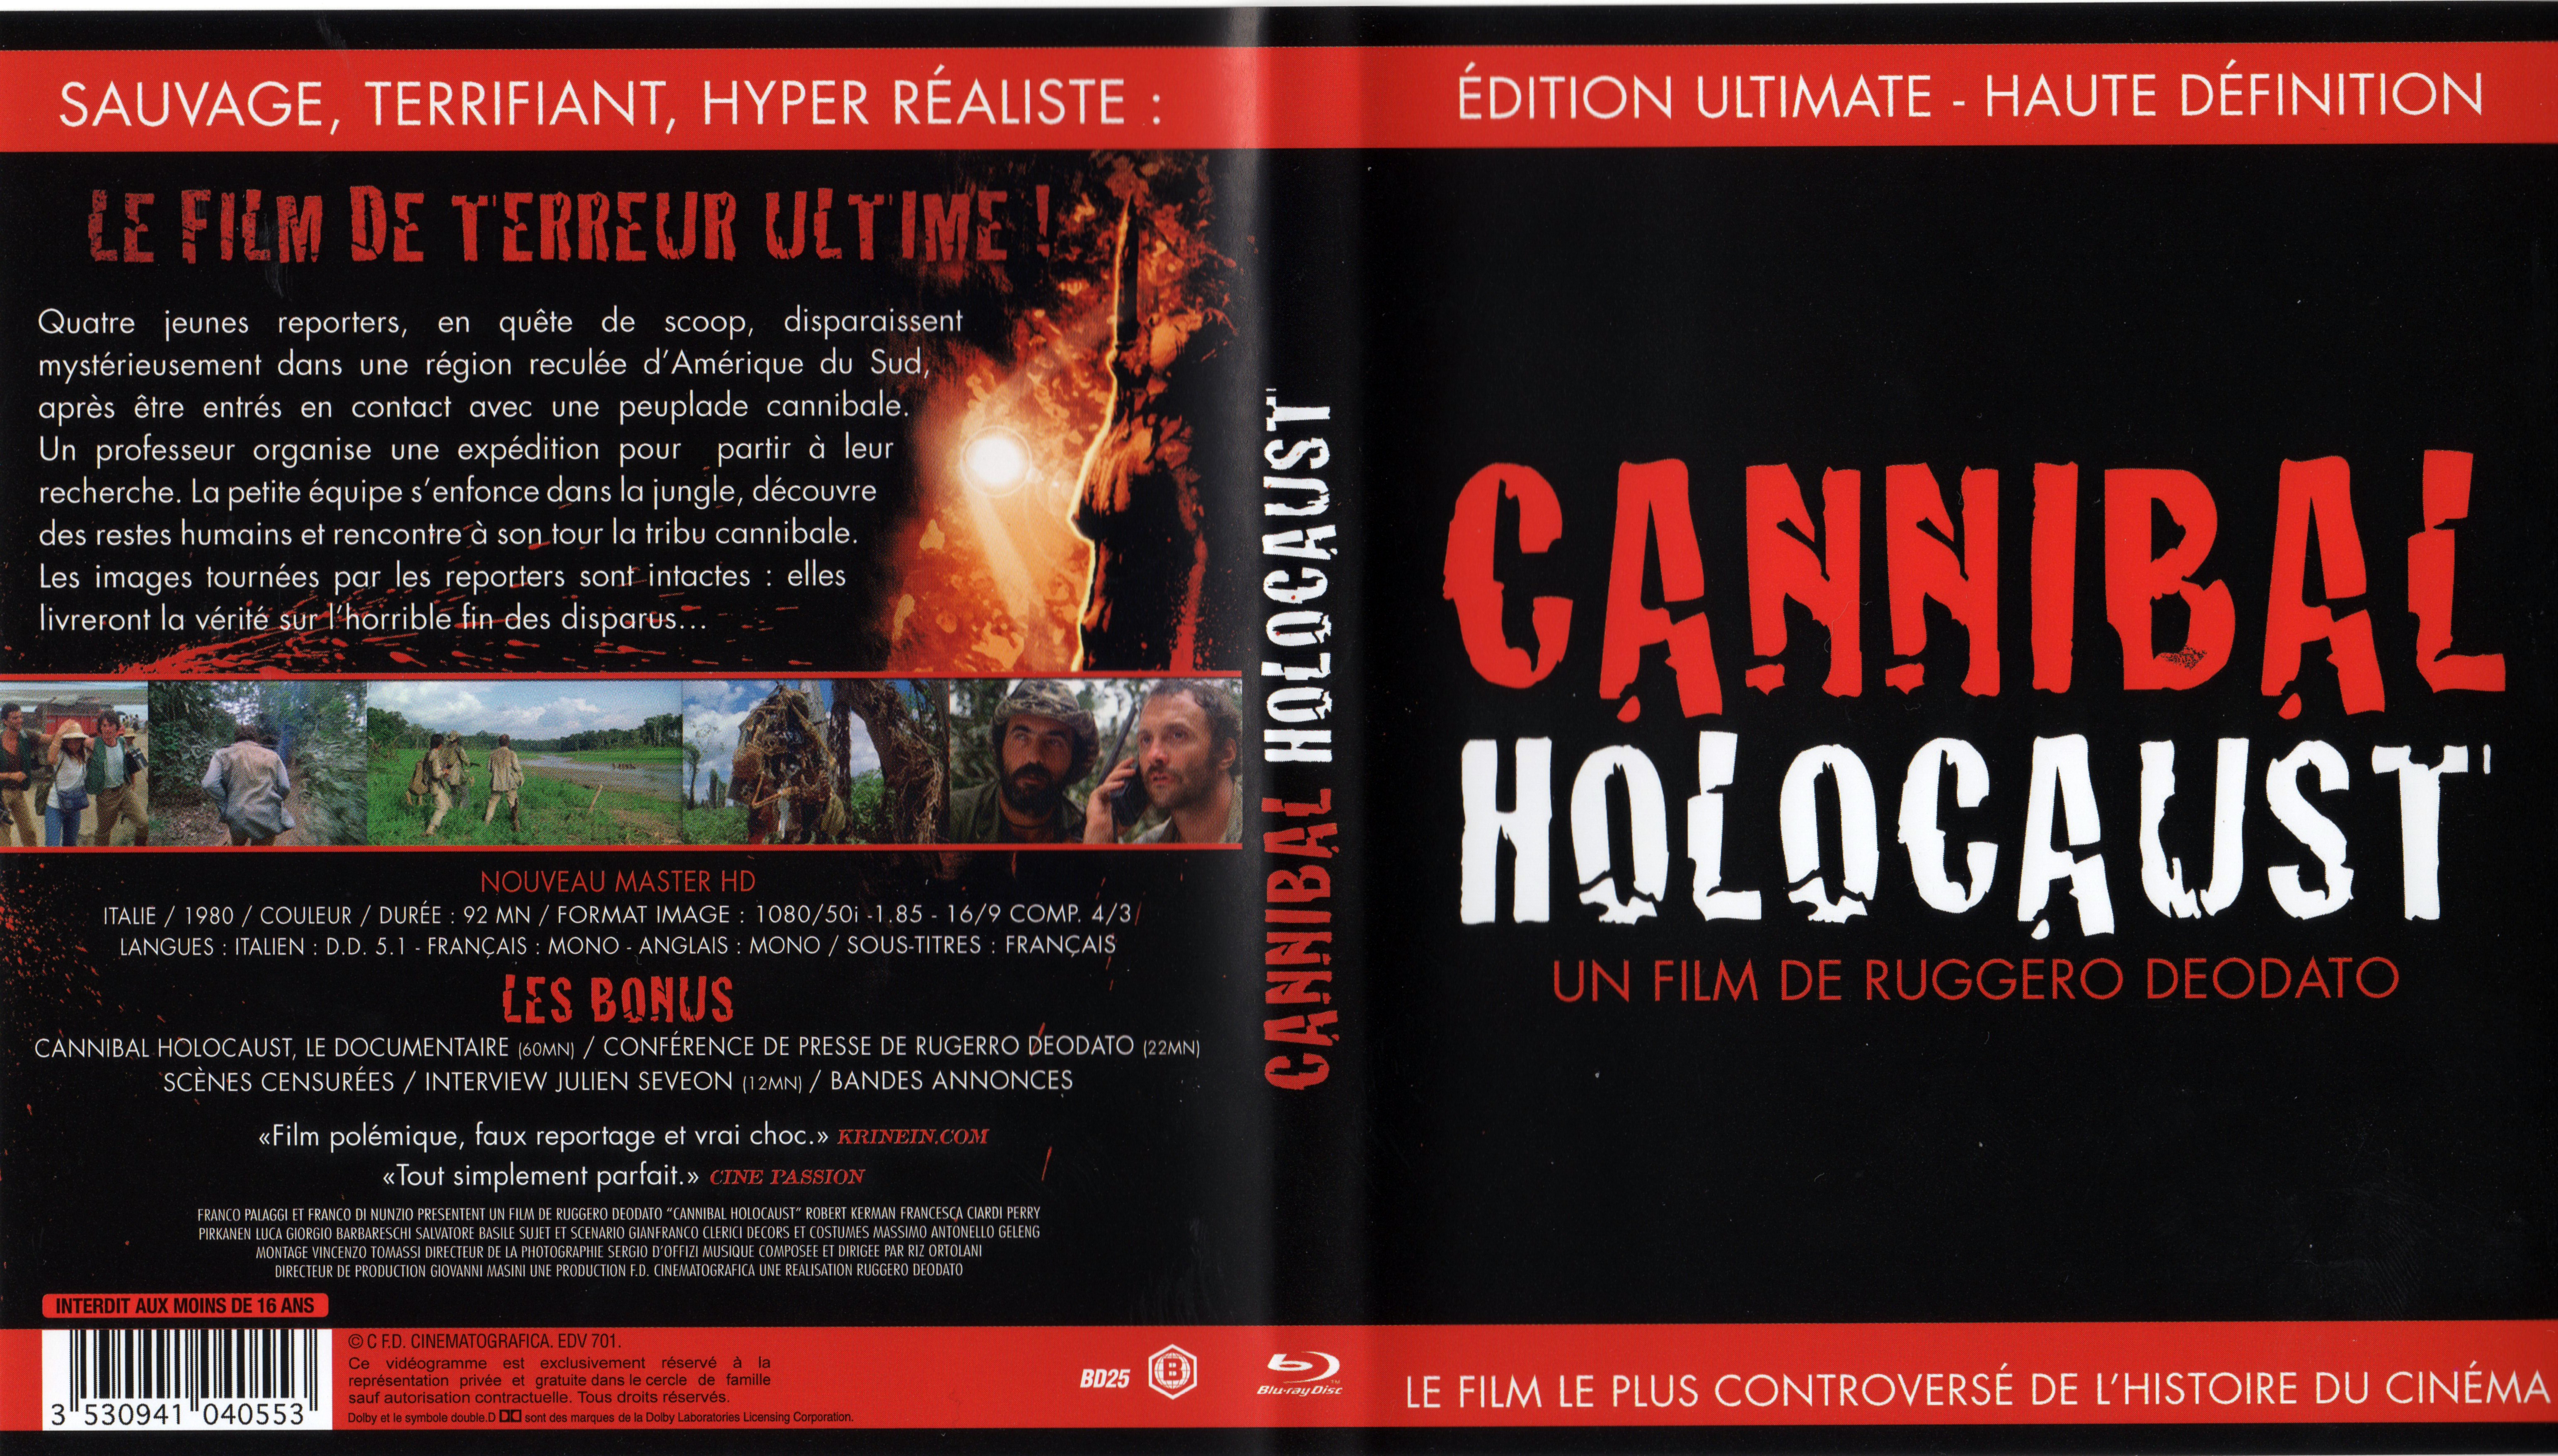 Jaquette DVD Cannibal holocaust (BLU-RAY)